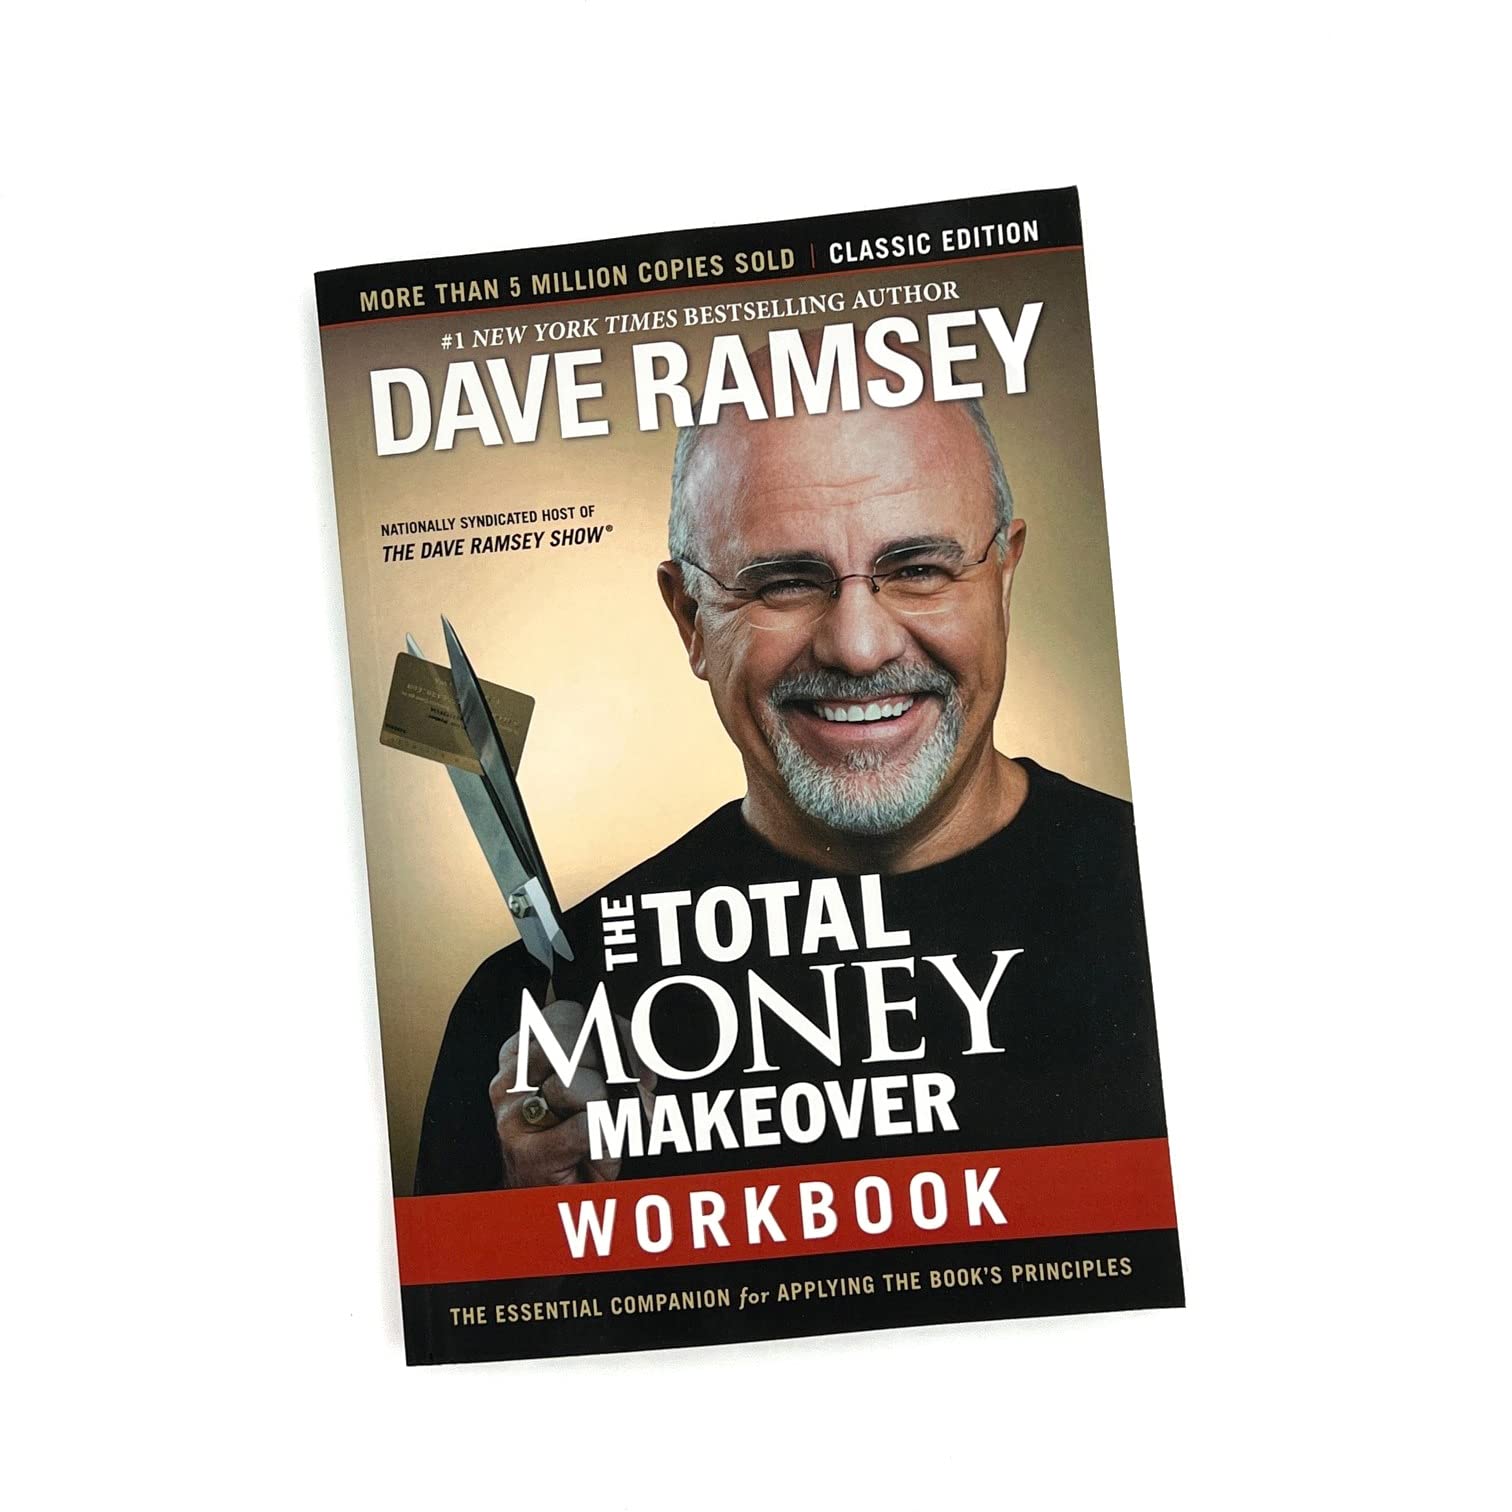 The Total Money Makeover Workbook: Classic Edition: The Essential Companion for Applying the Book’s Principles